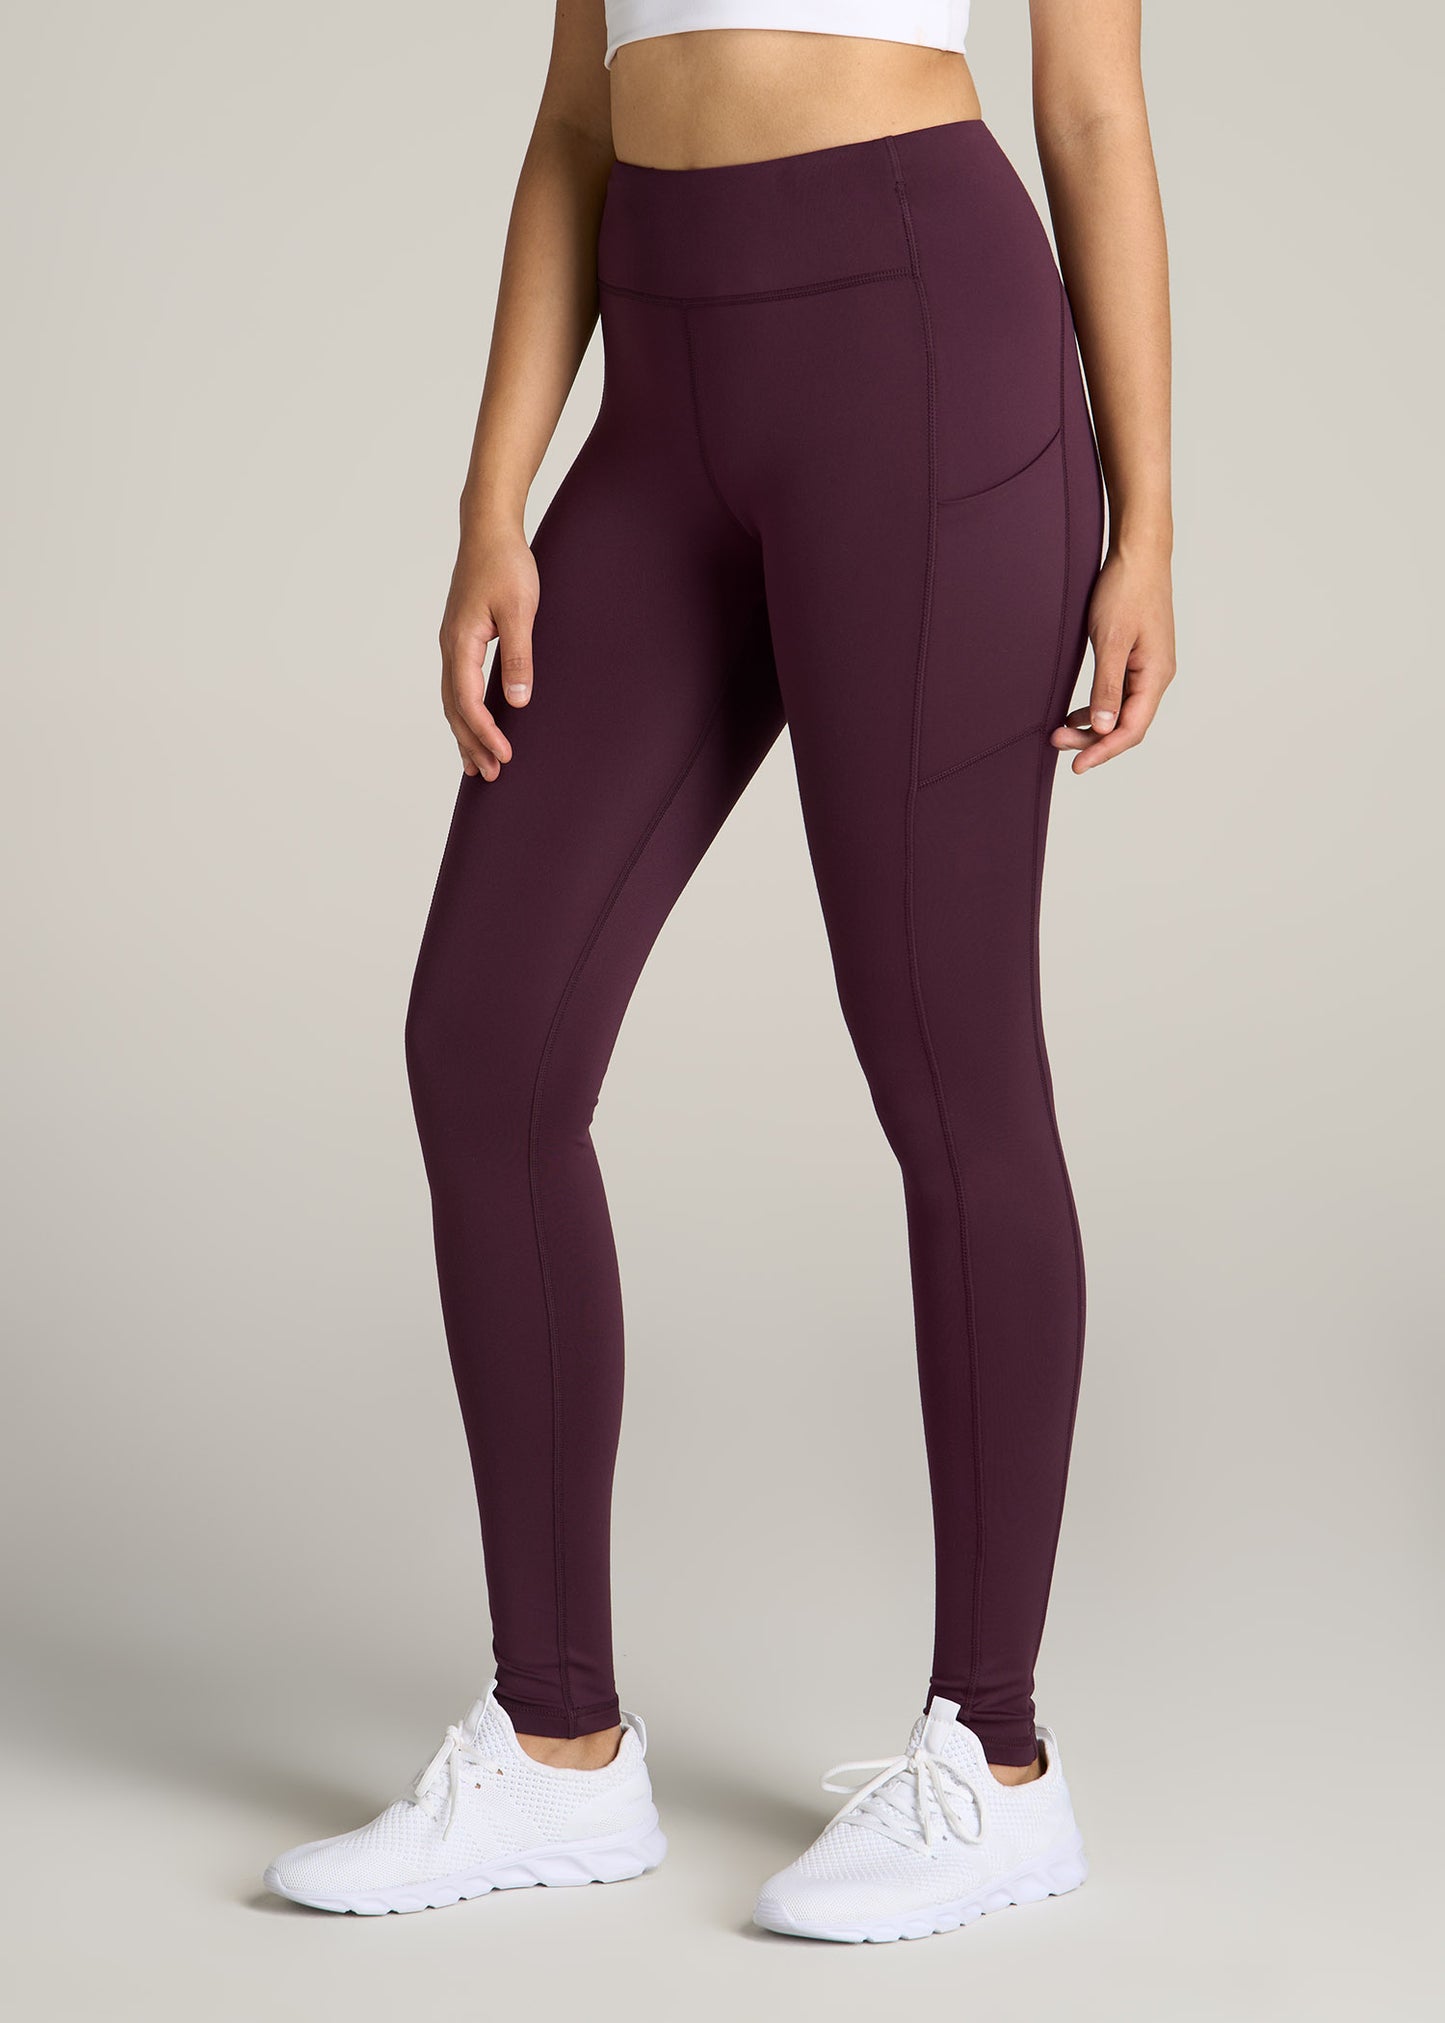 Women's Yoga Leggings with Side Pockets (2XL, Purple) at